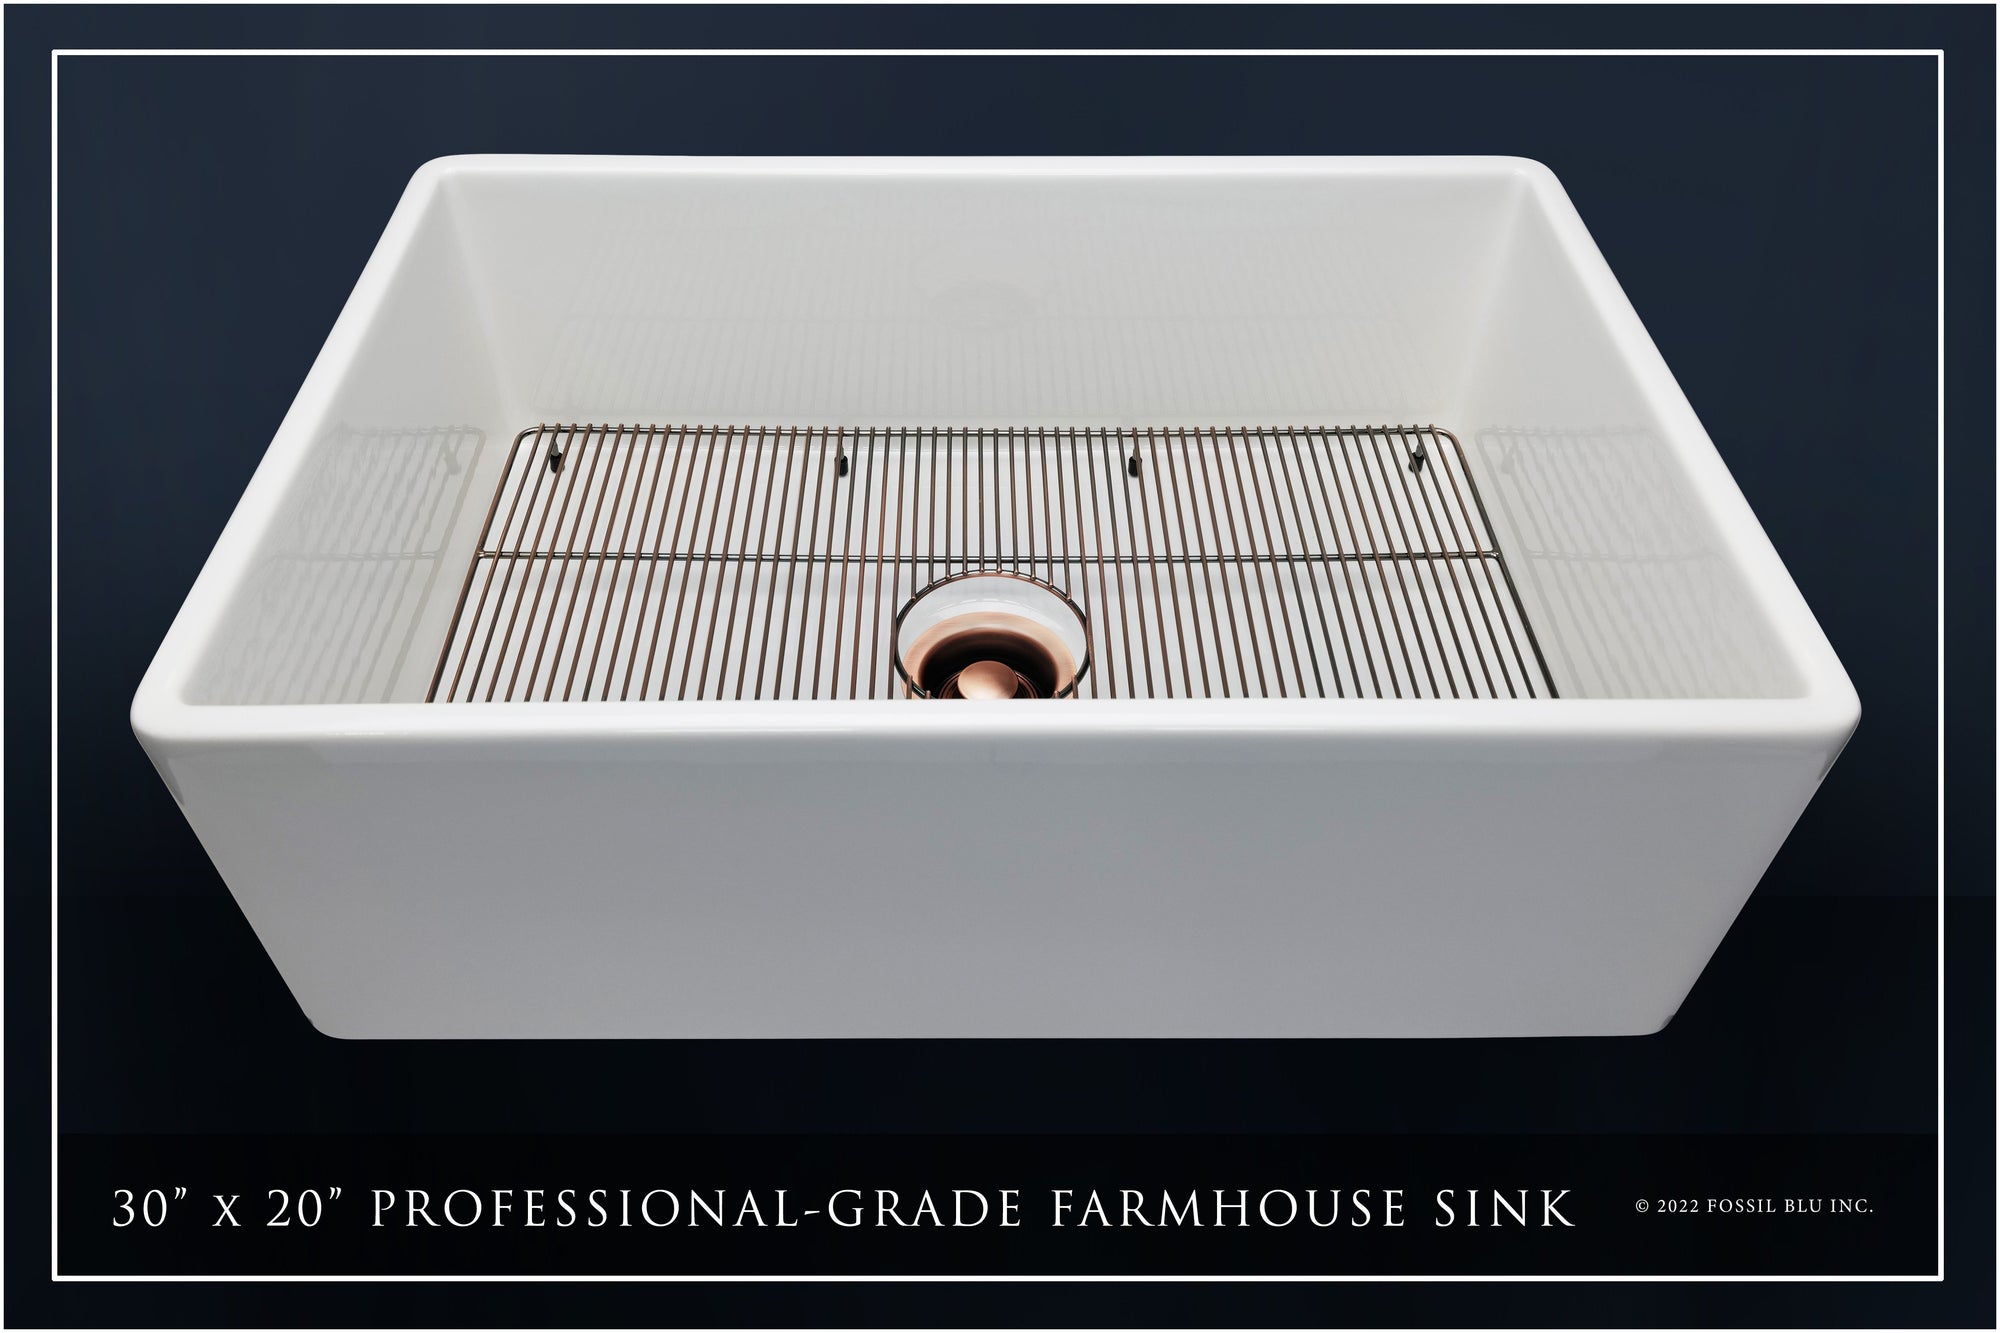 FSW1001AC LUXURY 30-INCH SOLID FIRECLAY FARMHOUSE SINK IN WHITE, ANTIQUE COPPER ACCS, FLAT FRONT